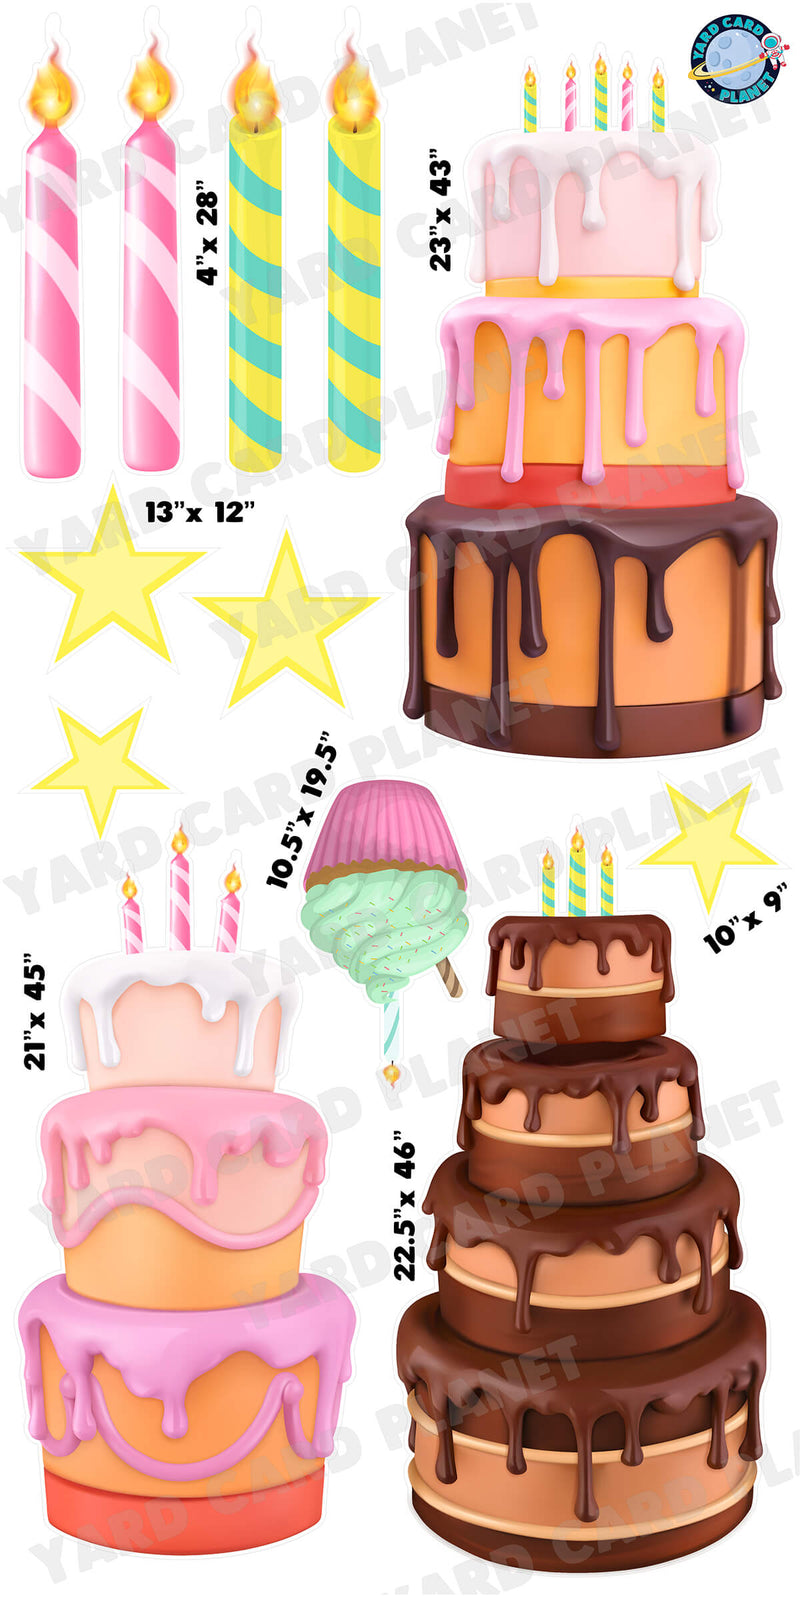 Extra Large Birthday Cakes with Candles Yard Card Flair Set with Measurements